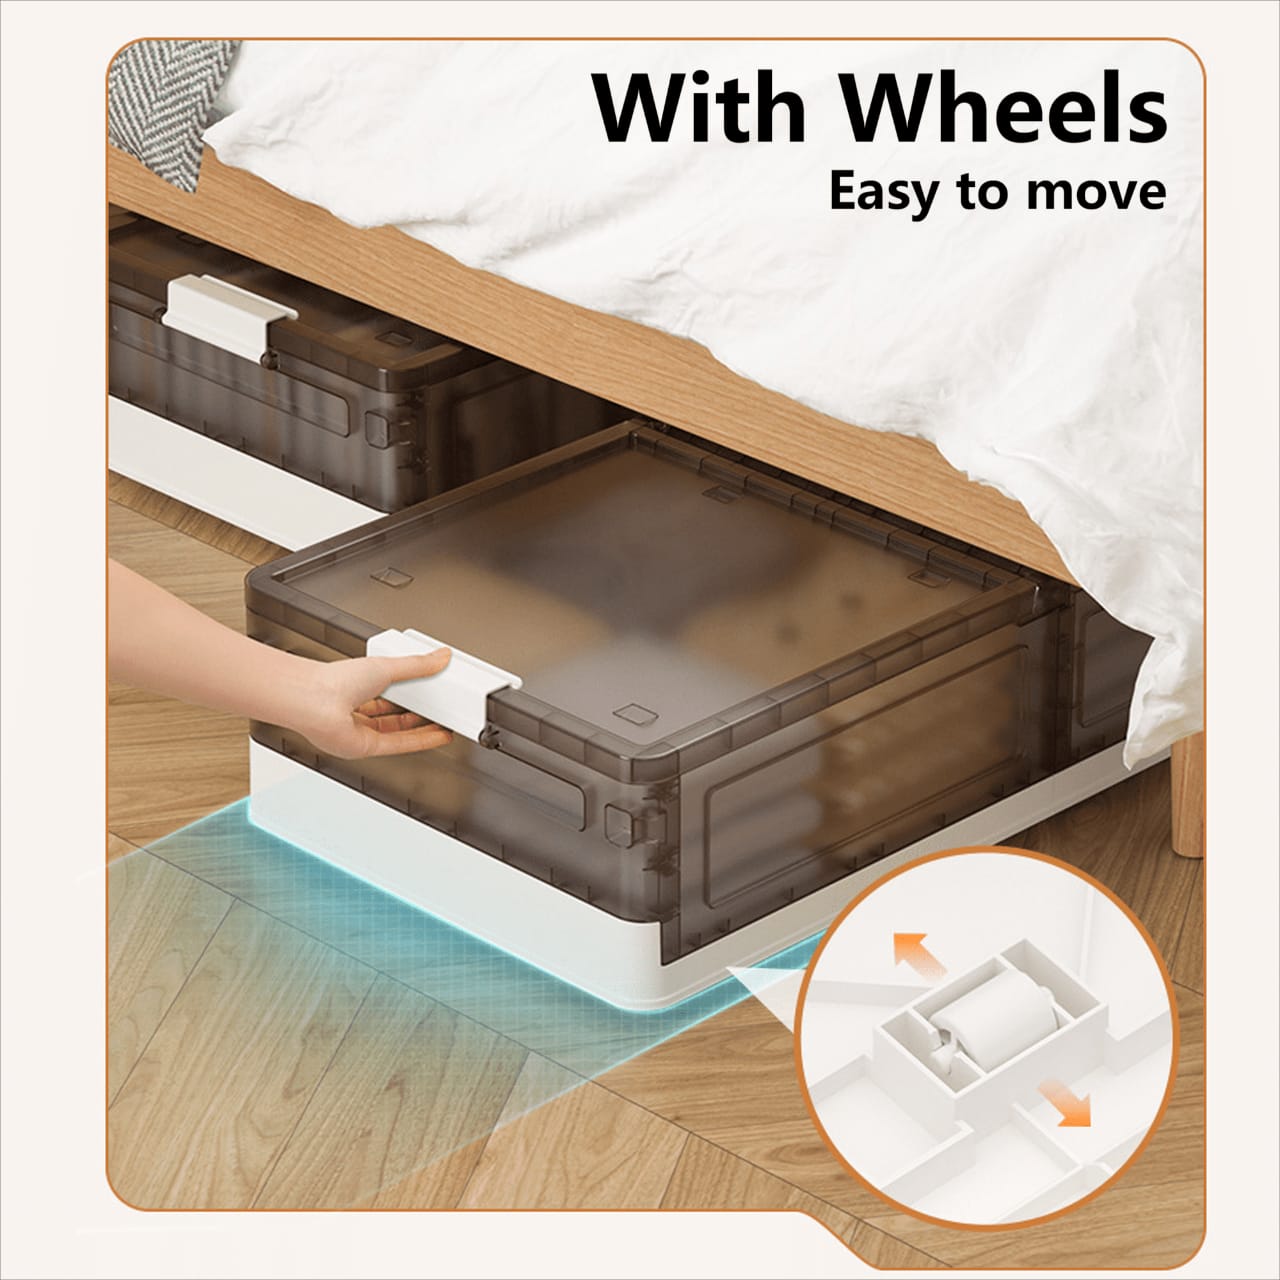 A Person is Opening Foldable Under Bed Rolling Storage Organizer Container.